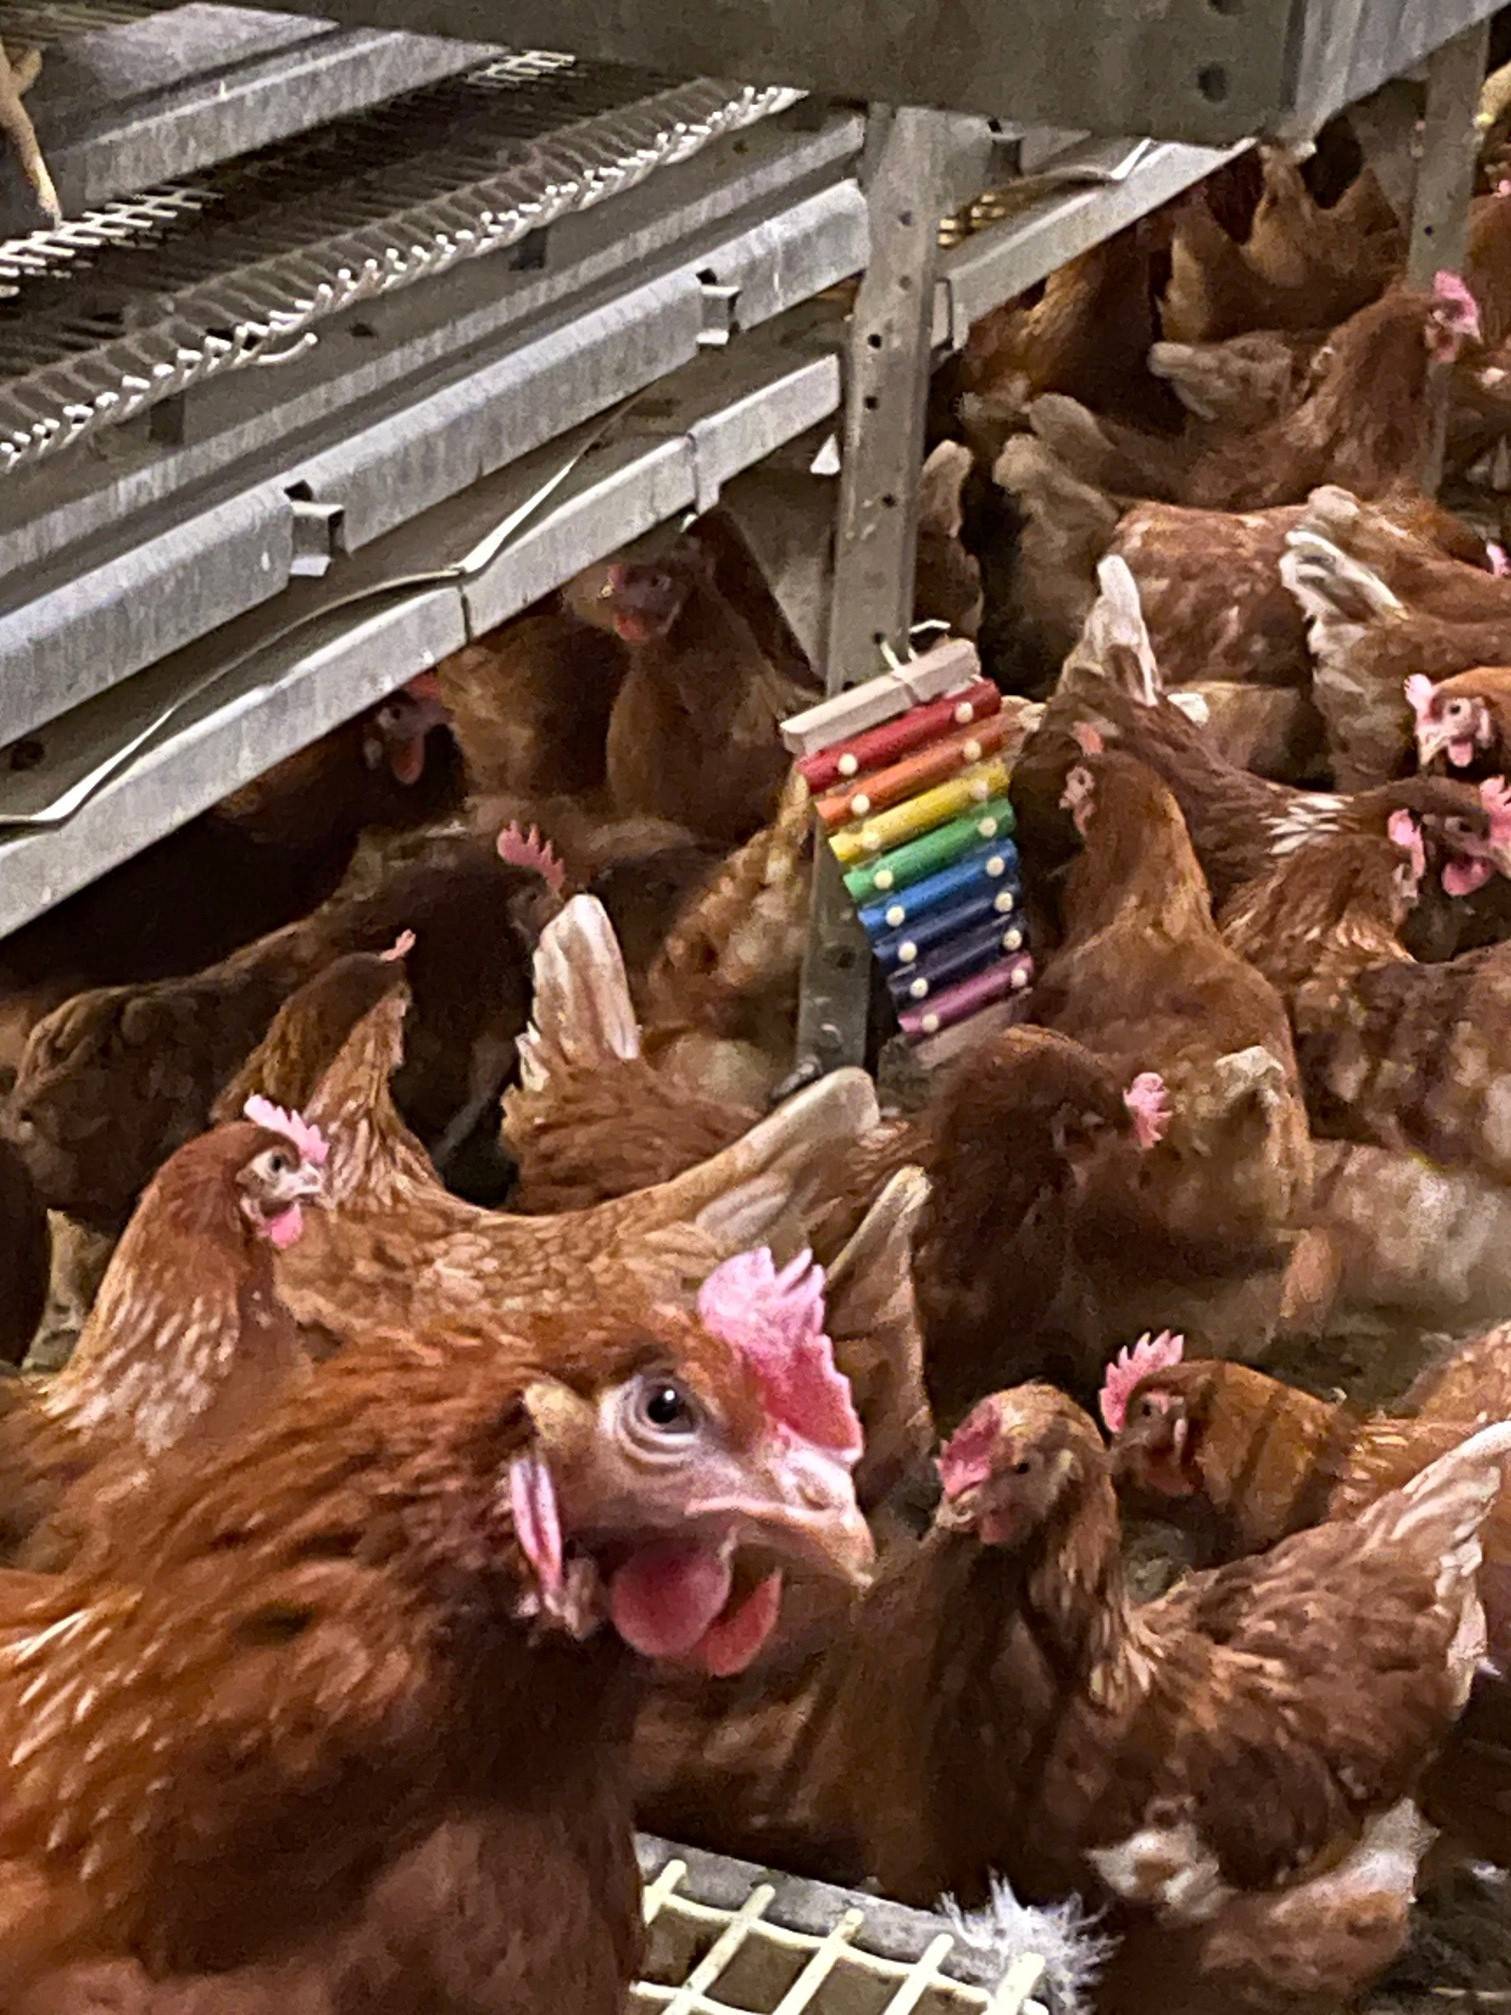 Many hens, one xylophone. One B.C. farmer has supplied their egg-laying hens with a xylophone to pass the time. (supplied image).